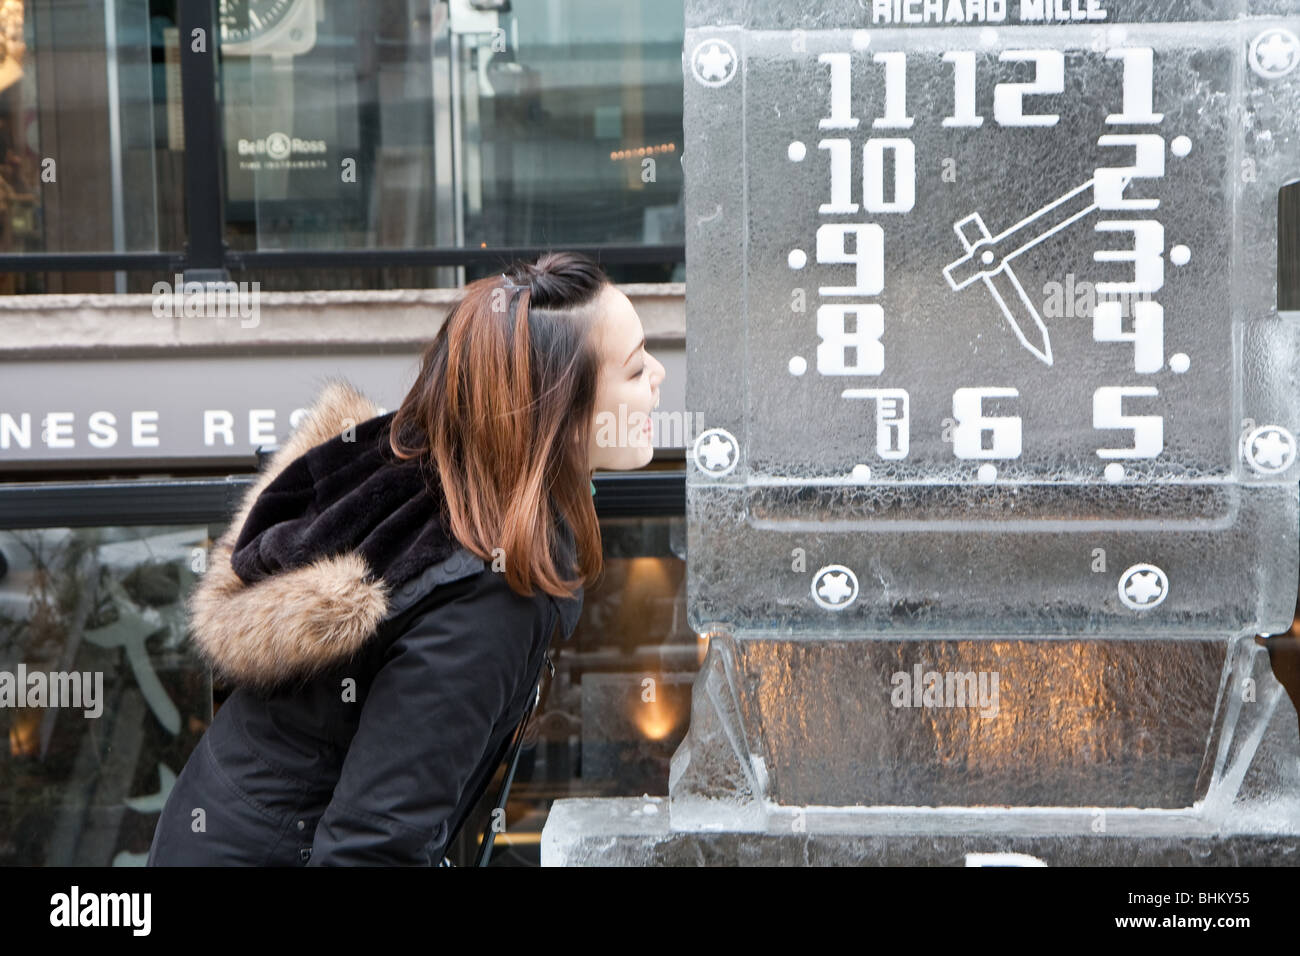 A girl eating a clock made up of ice Stock Photo